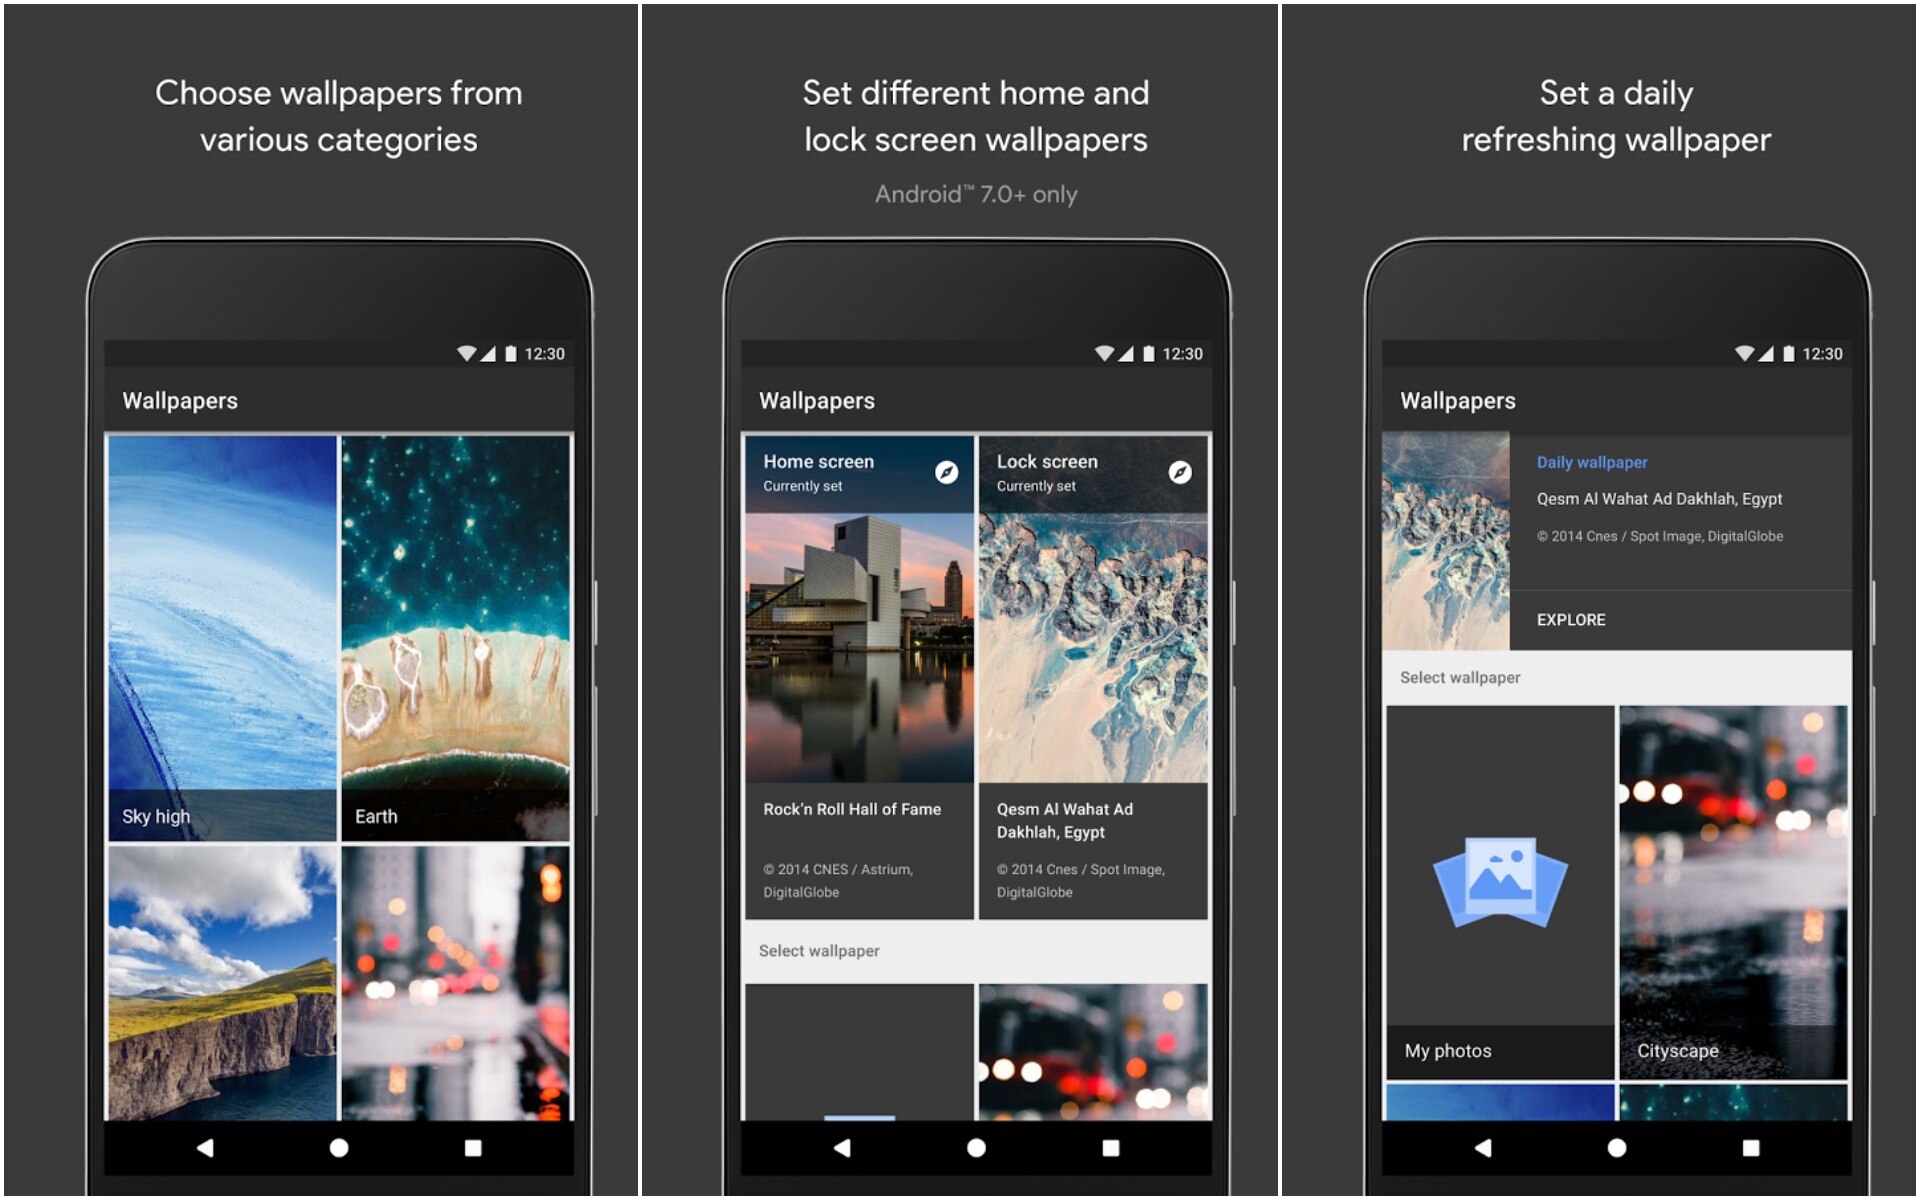 The Best Wallpaper Apps for Android and iOS | CellularNews